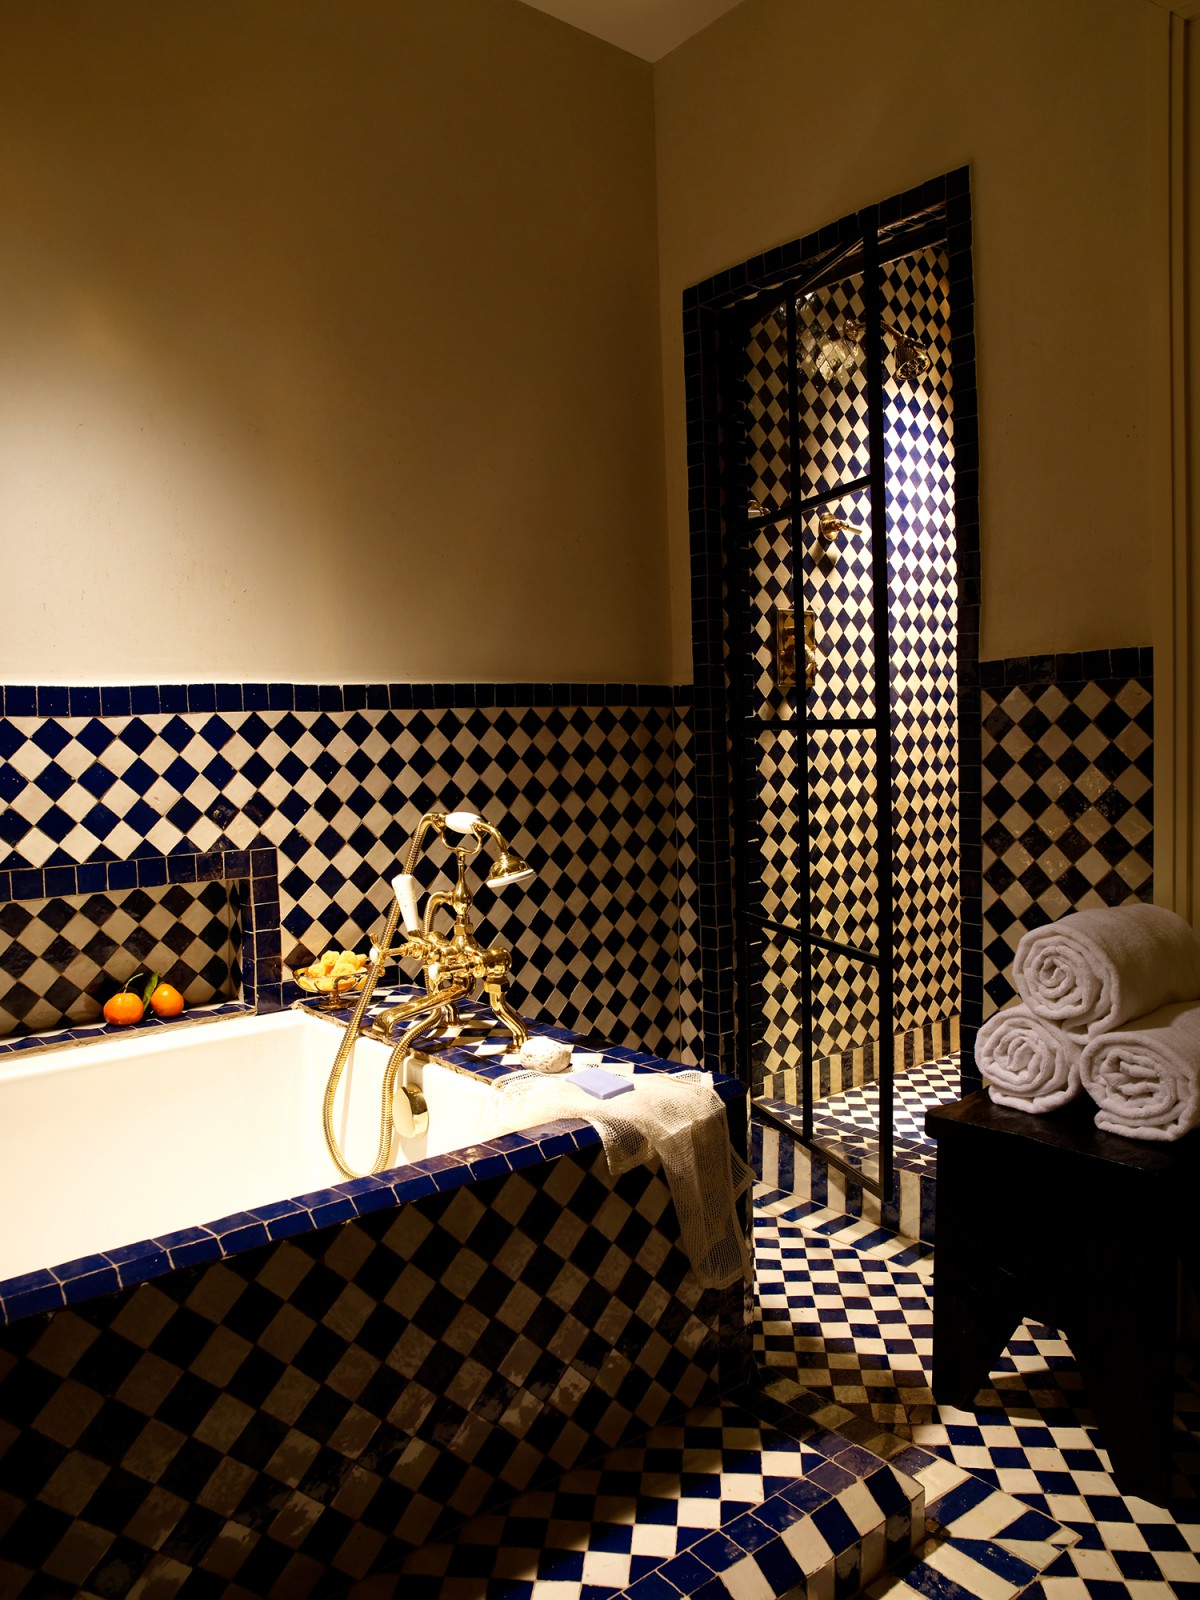 View of the tub, shower and patterned tile in the Deluxe King room